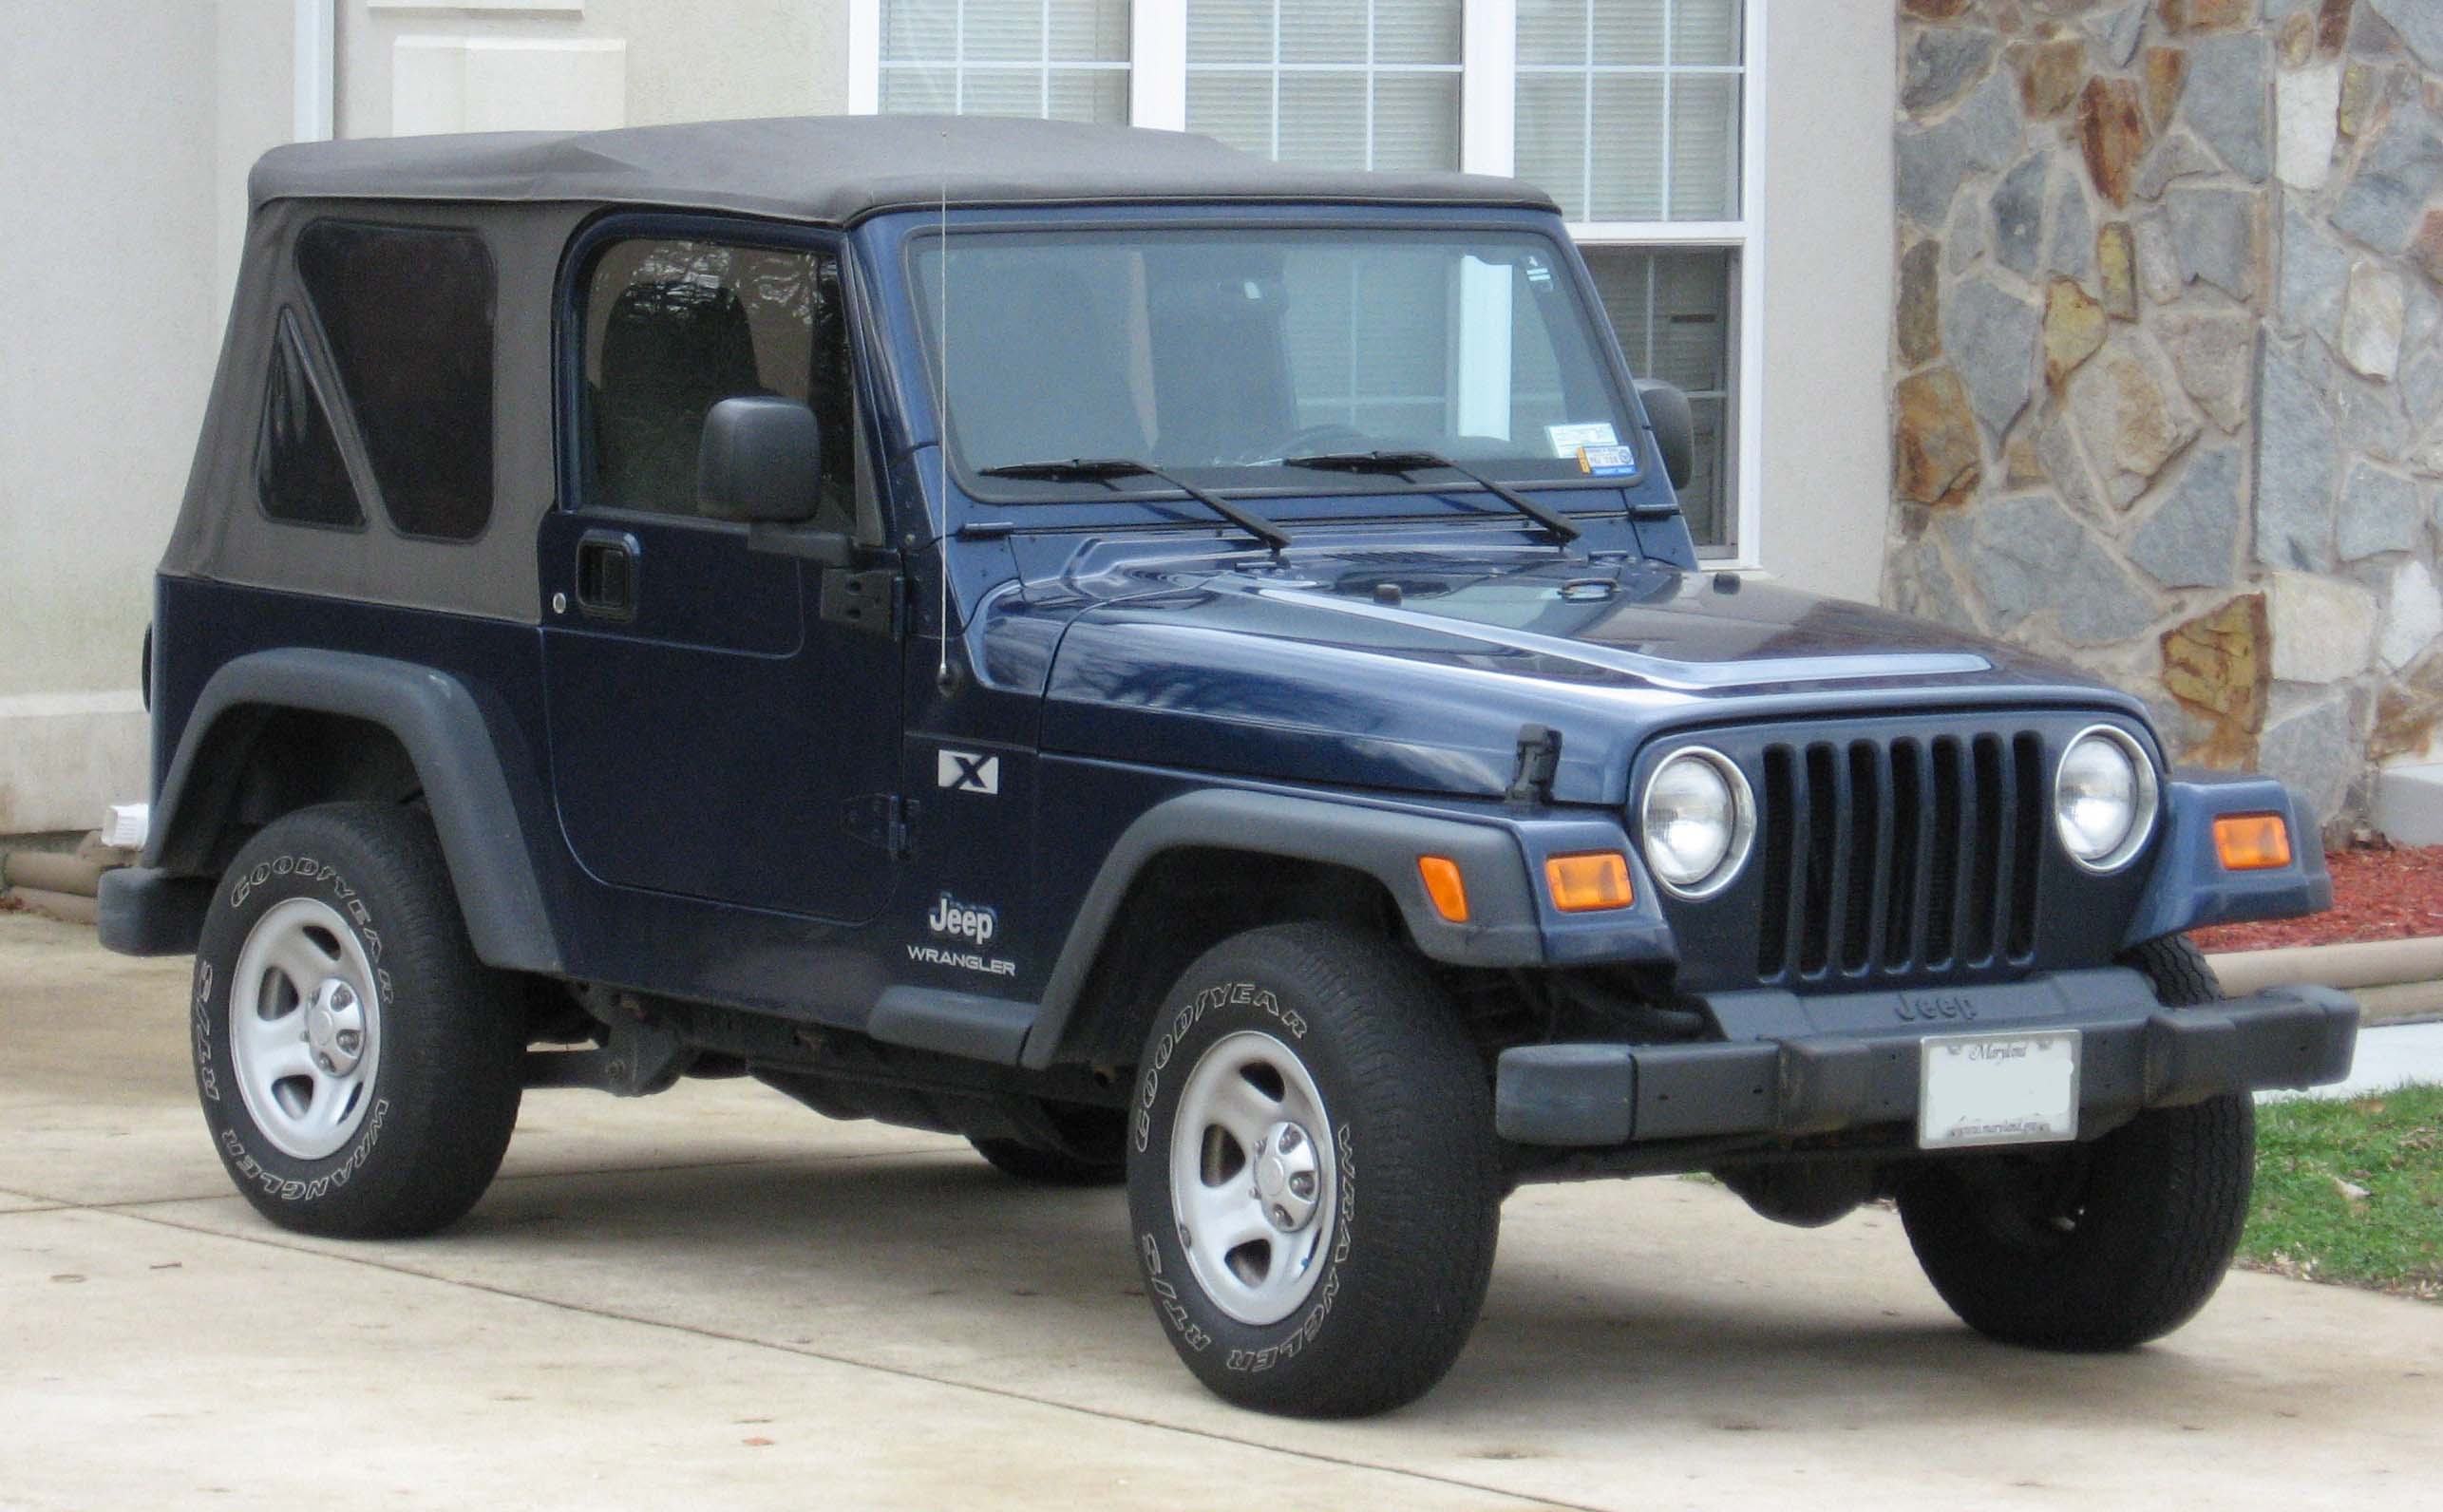 A blue 1990s Jeep Wrangler parked outside of a driveway.